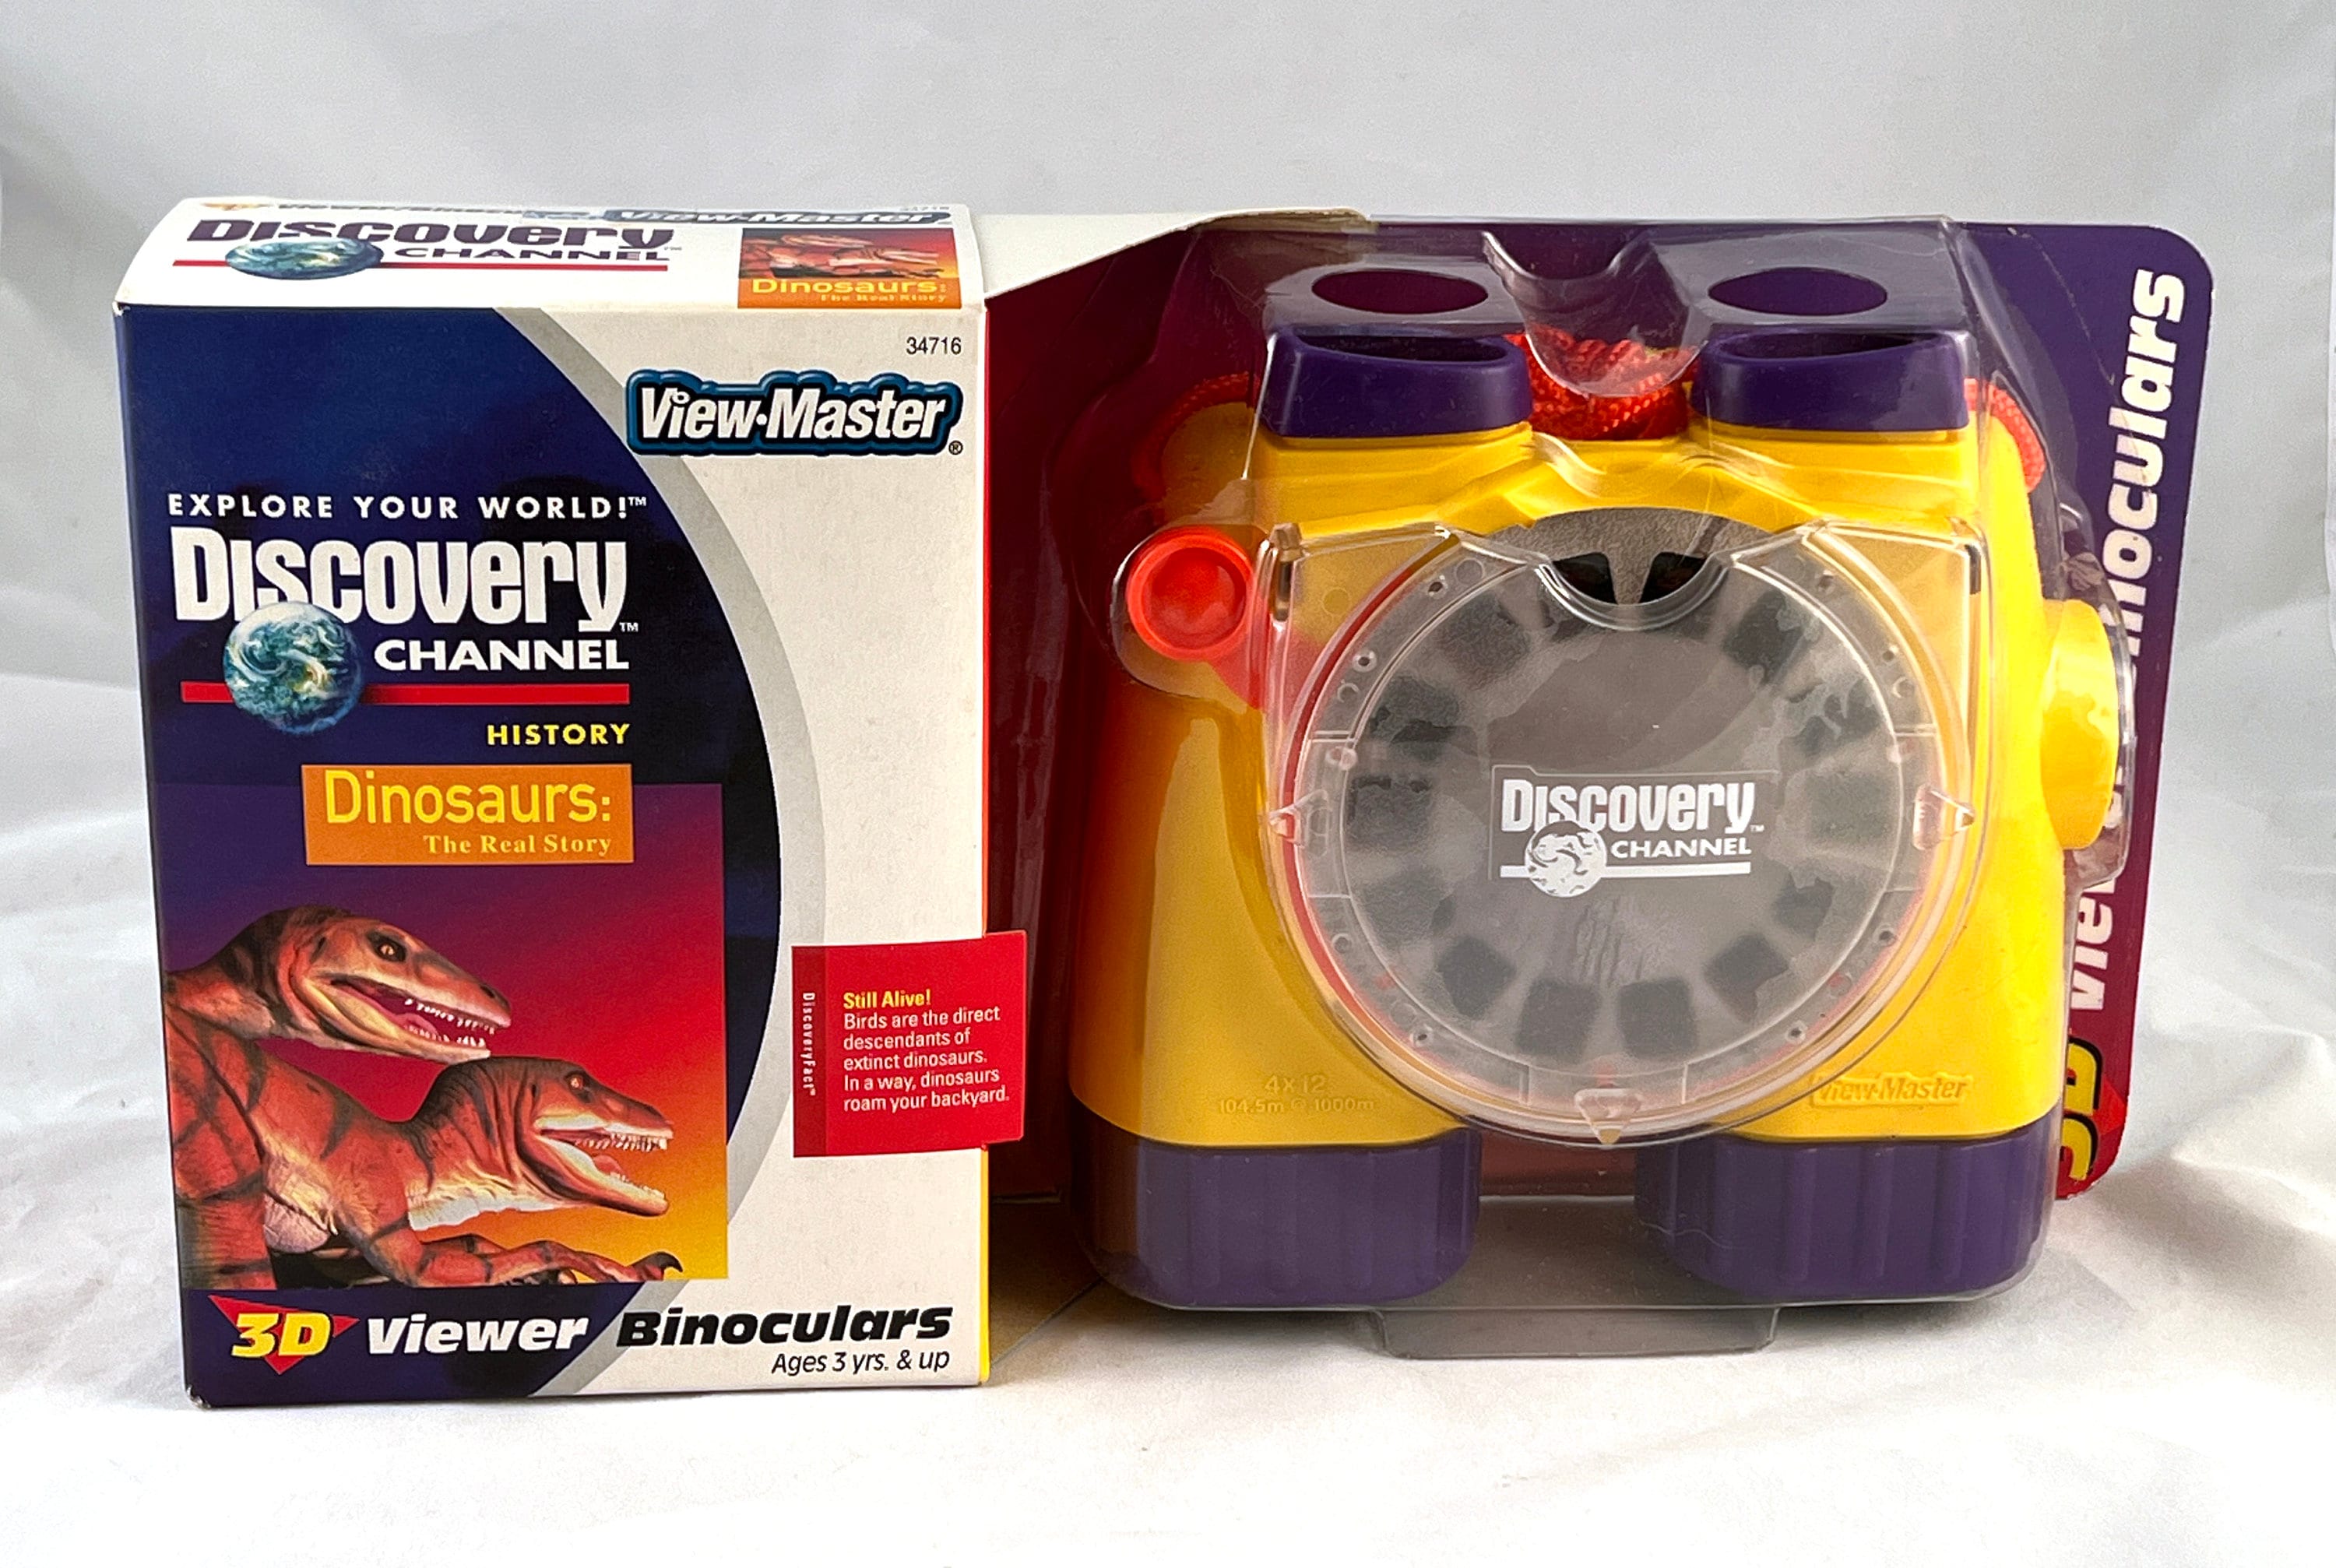 SALE Discovery Channel 3-D View-master Viewer / Binoculars Set